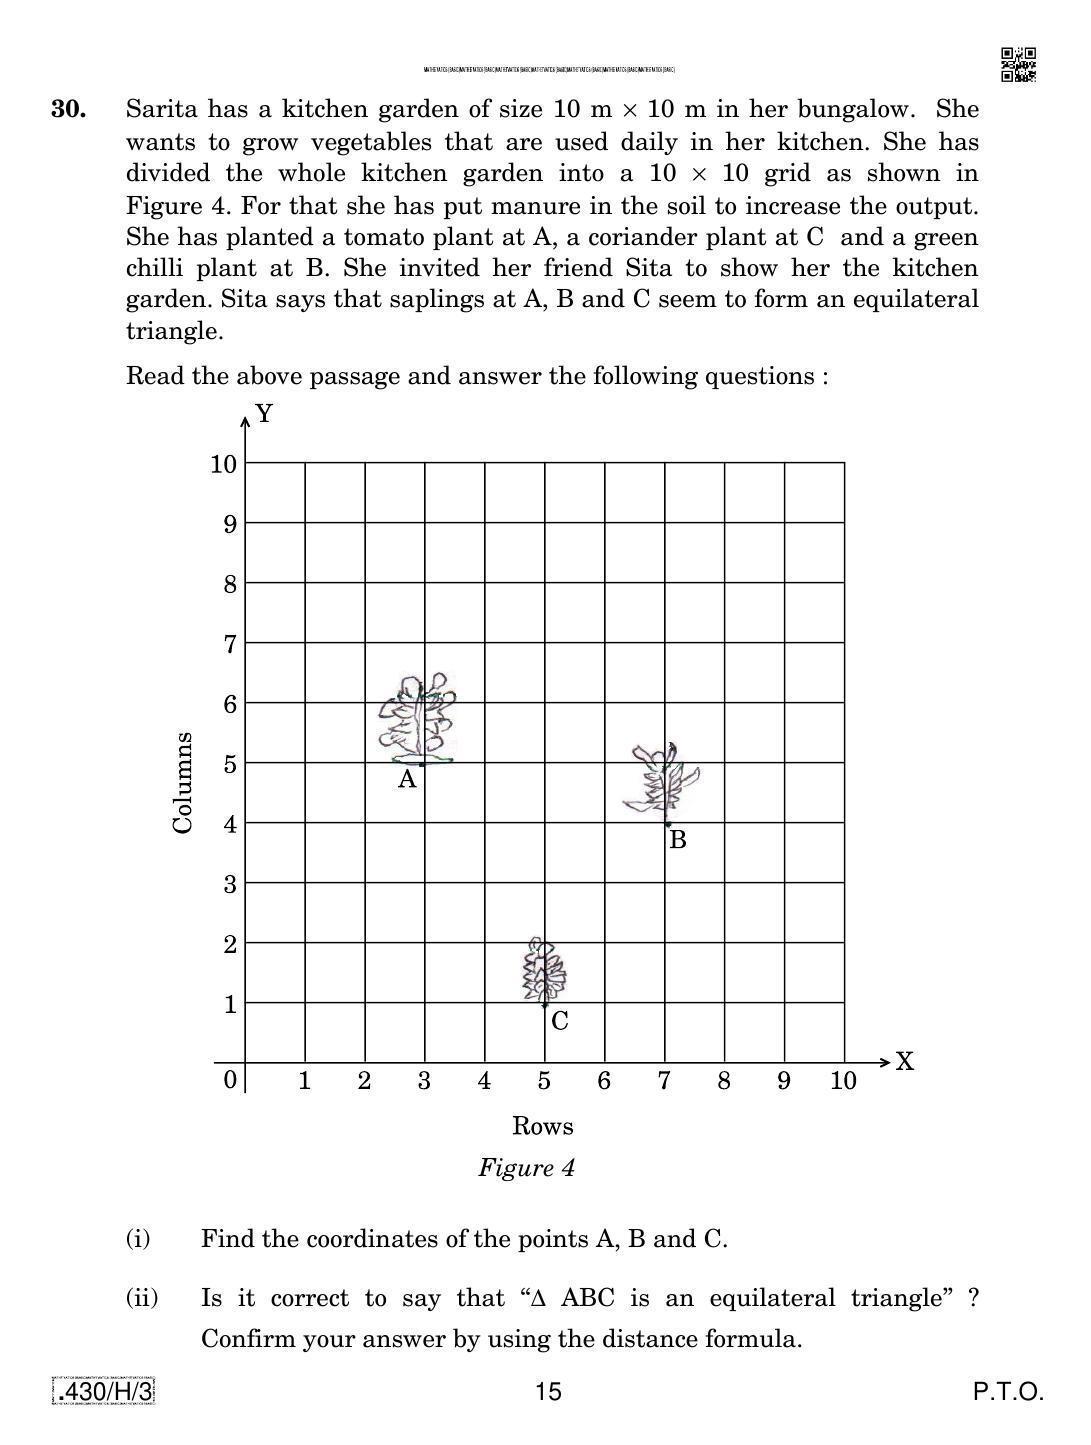 CBSE Class 10 430-C-3 - Maths (Basic) 2020 Compartment Question Paper - Page 15